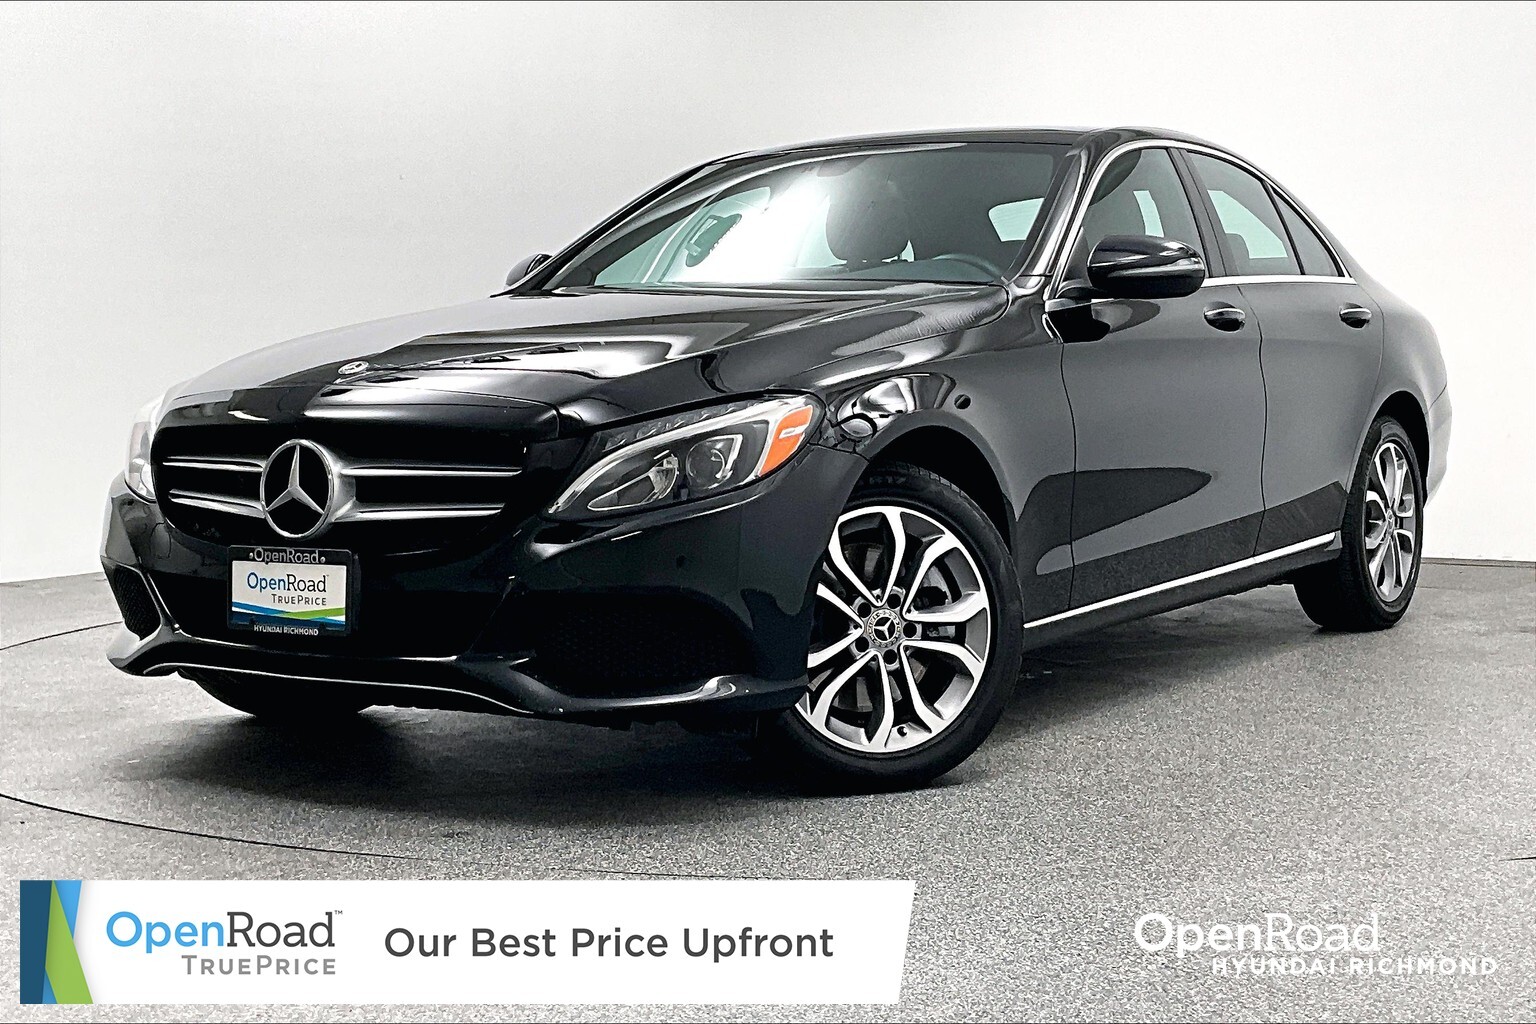 2018 Mercedes-Benz C300 4MATIC Sedan Priced to Sell!